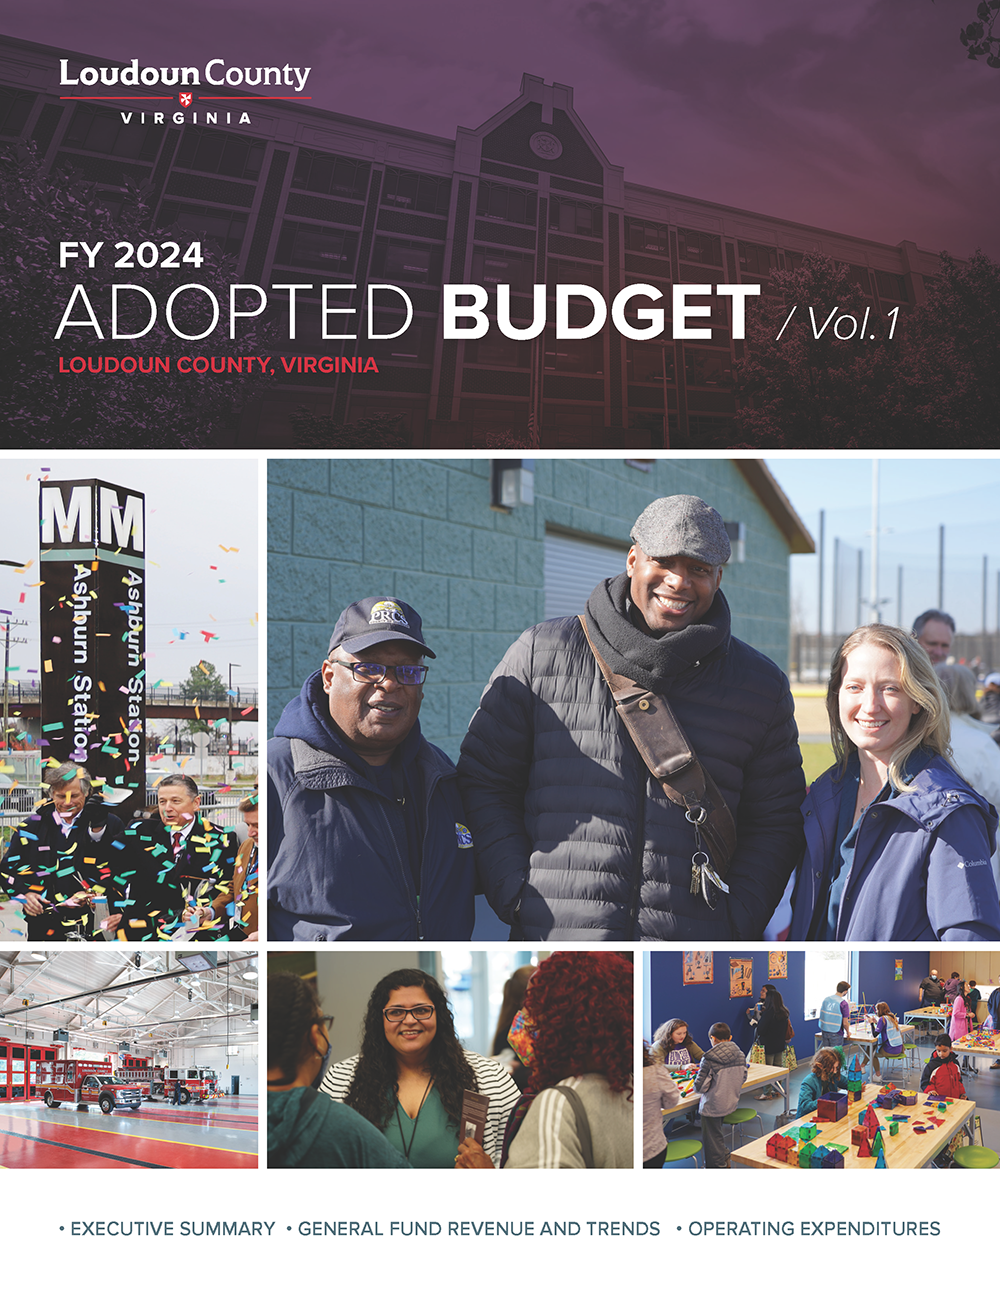 Link to FY 2024 Adopted Budget Volume 1